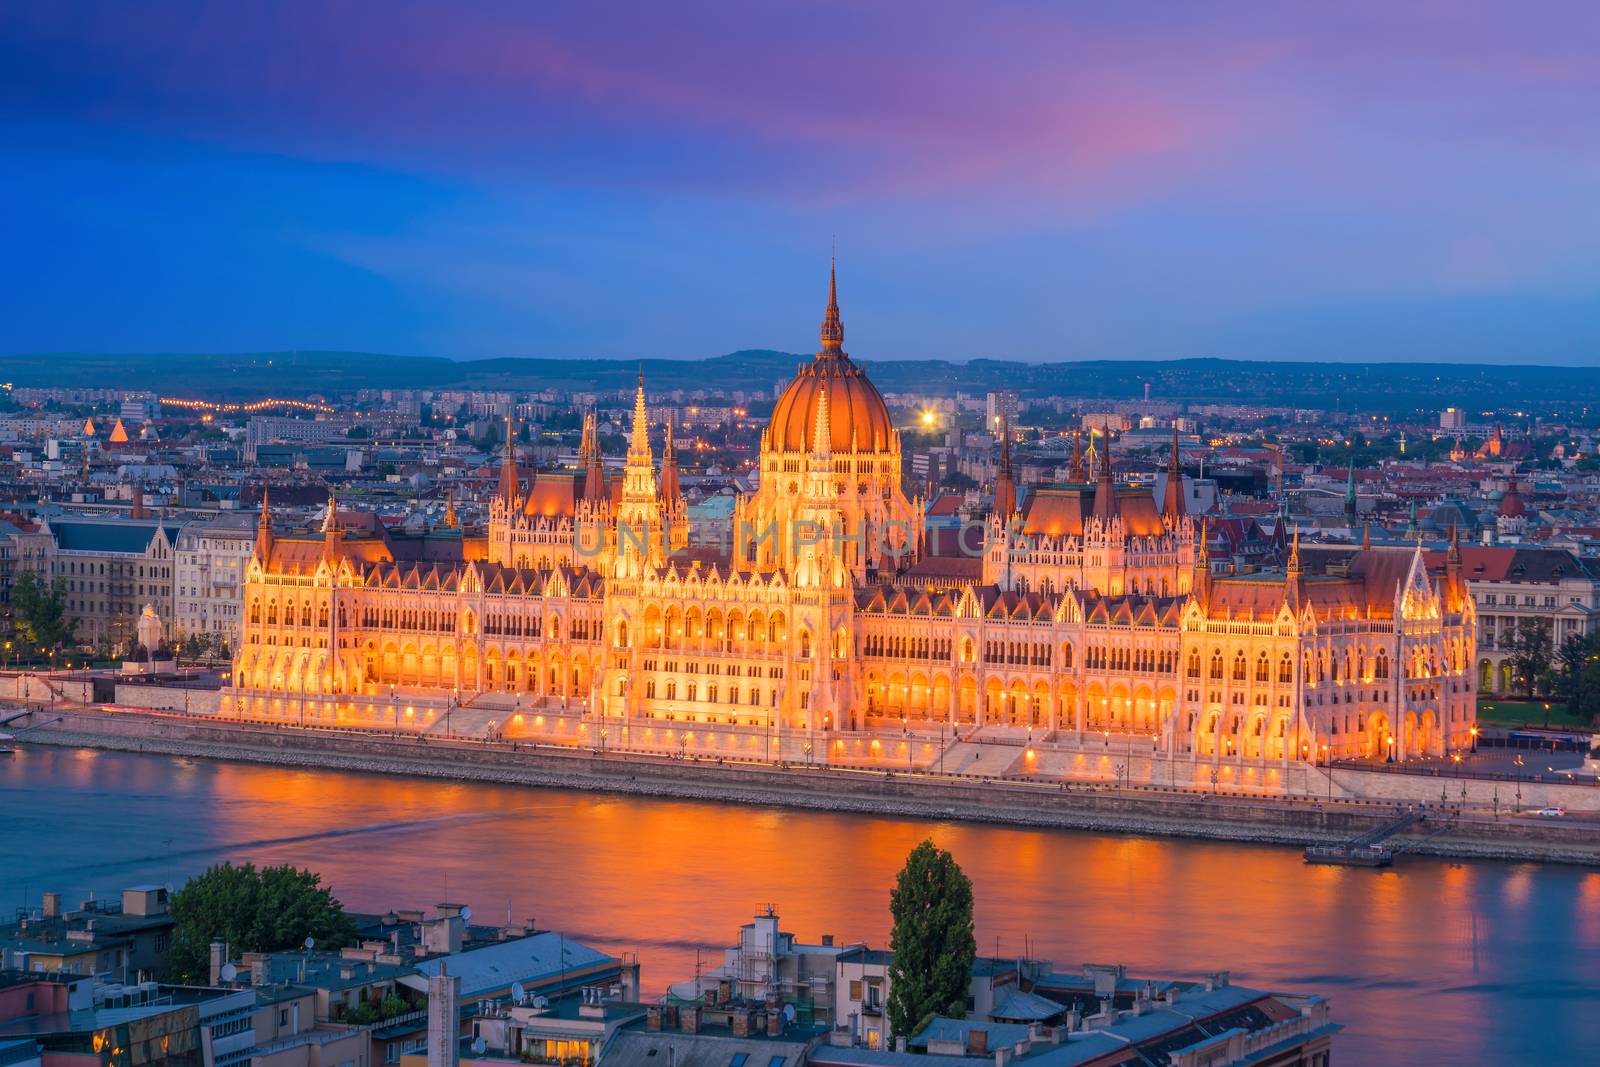 Parliament building over delta of Danube river in Budapest by f11photo